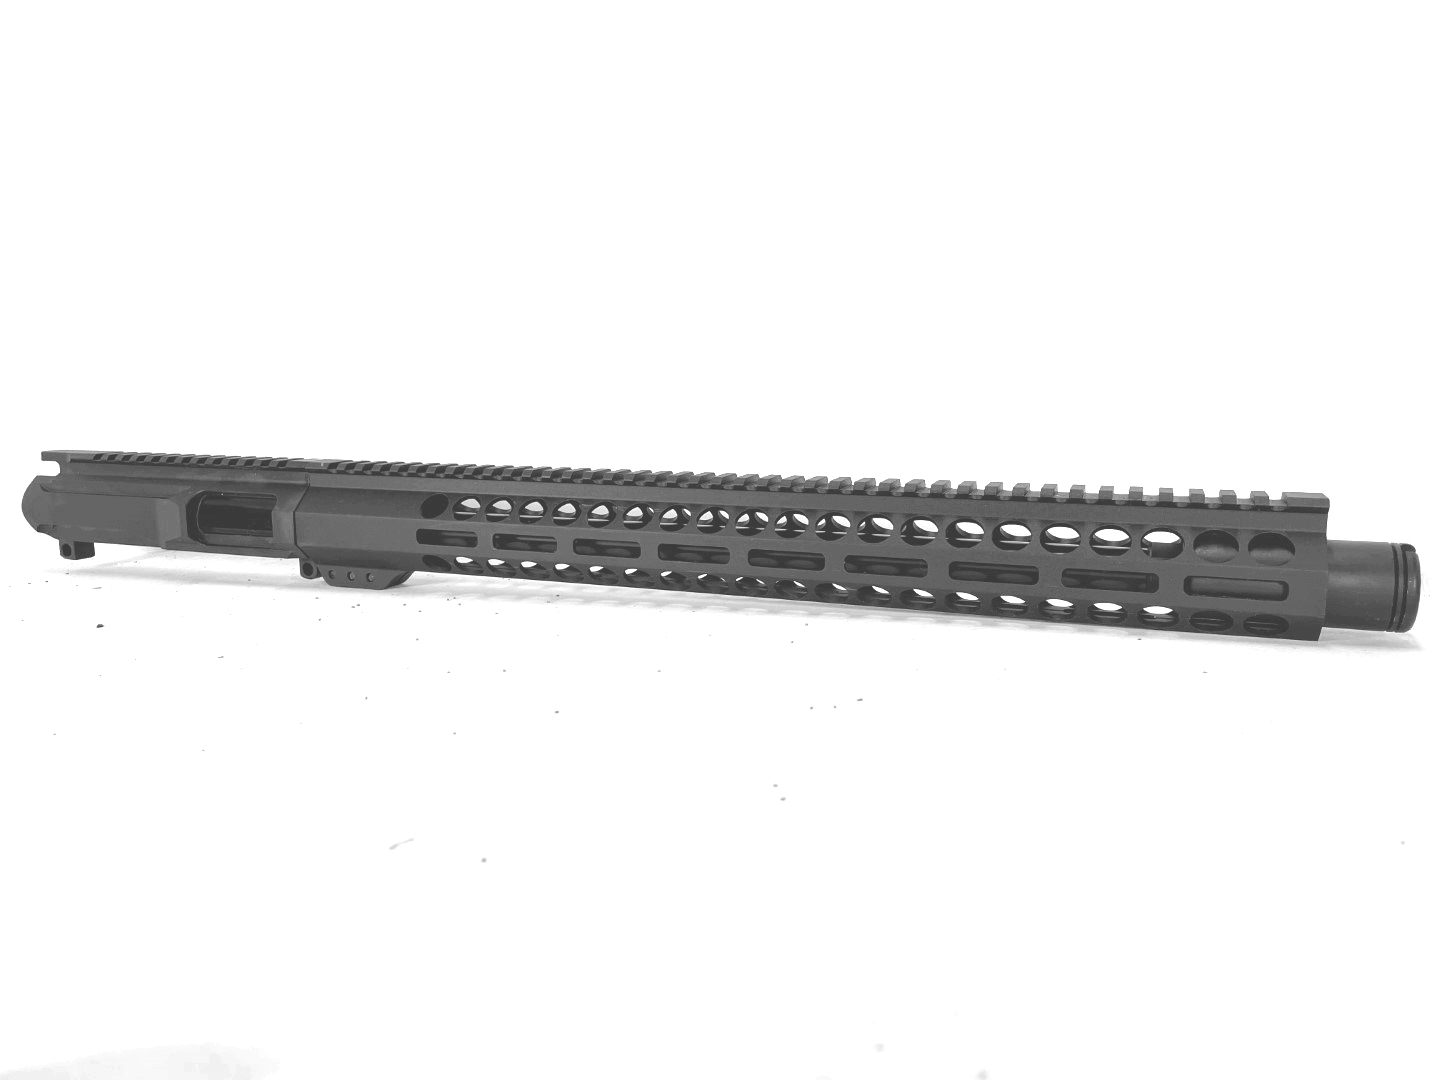 16 inch AR-15 9mm Pistol Caliber Melonite Upper with Flash Can